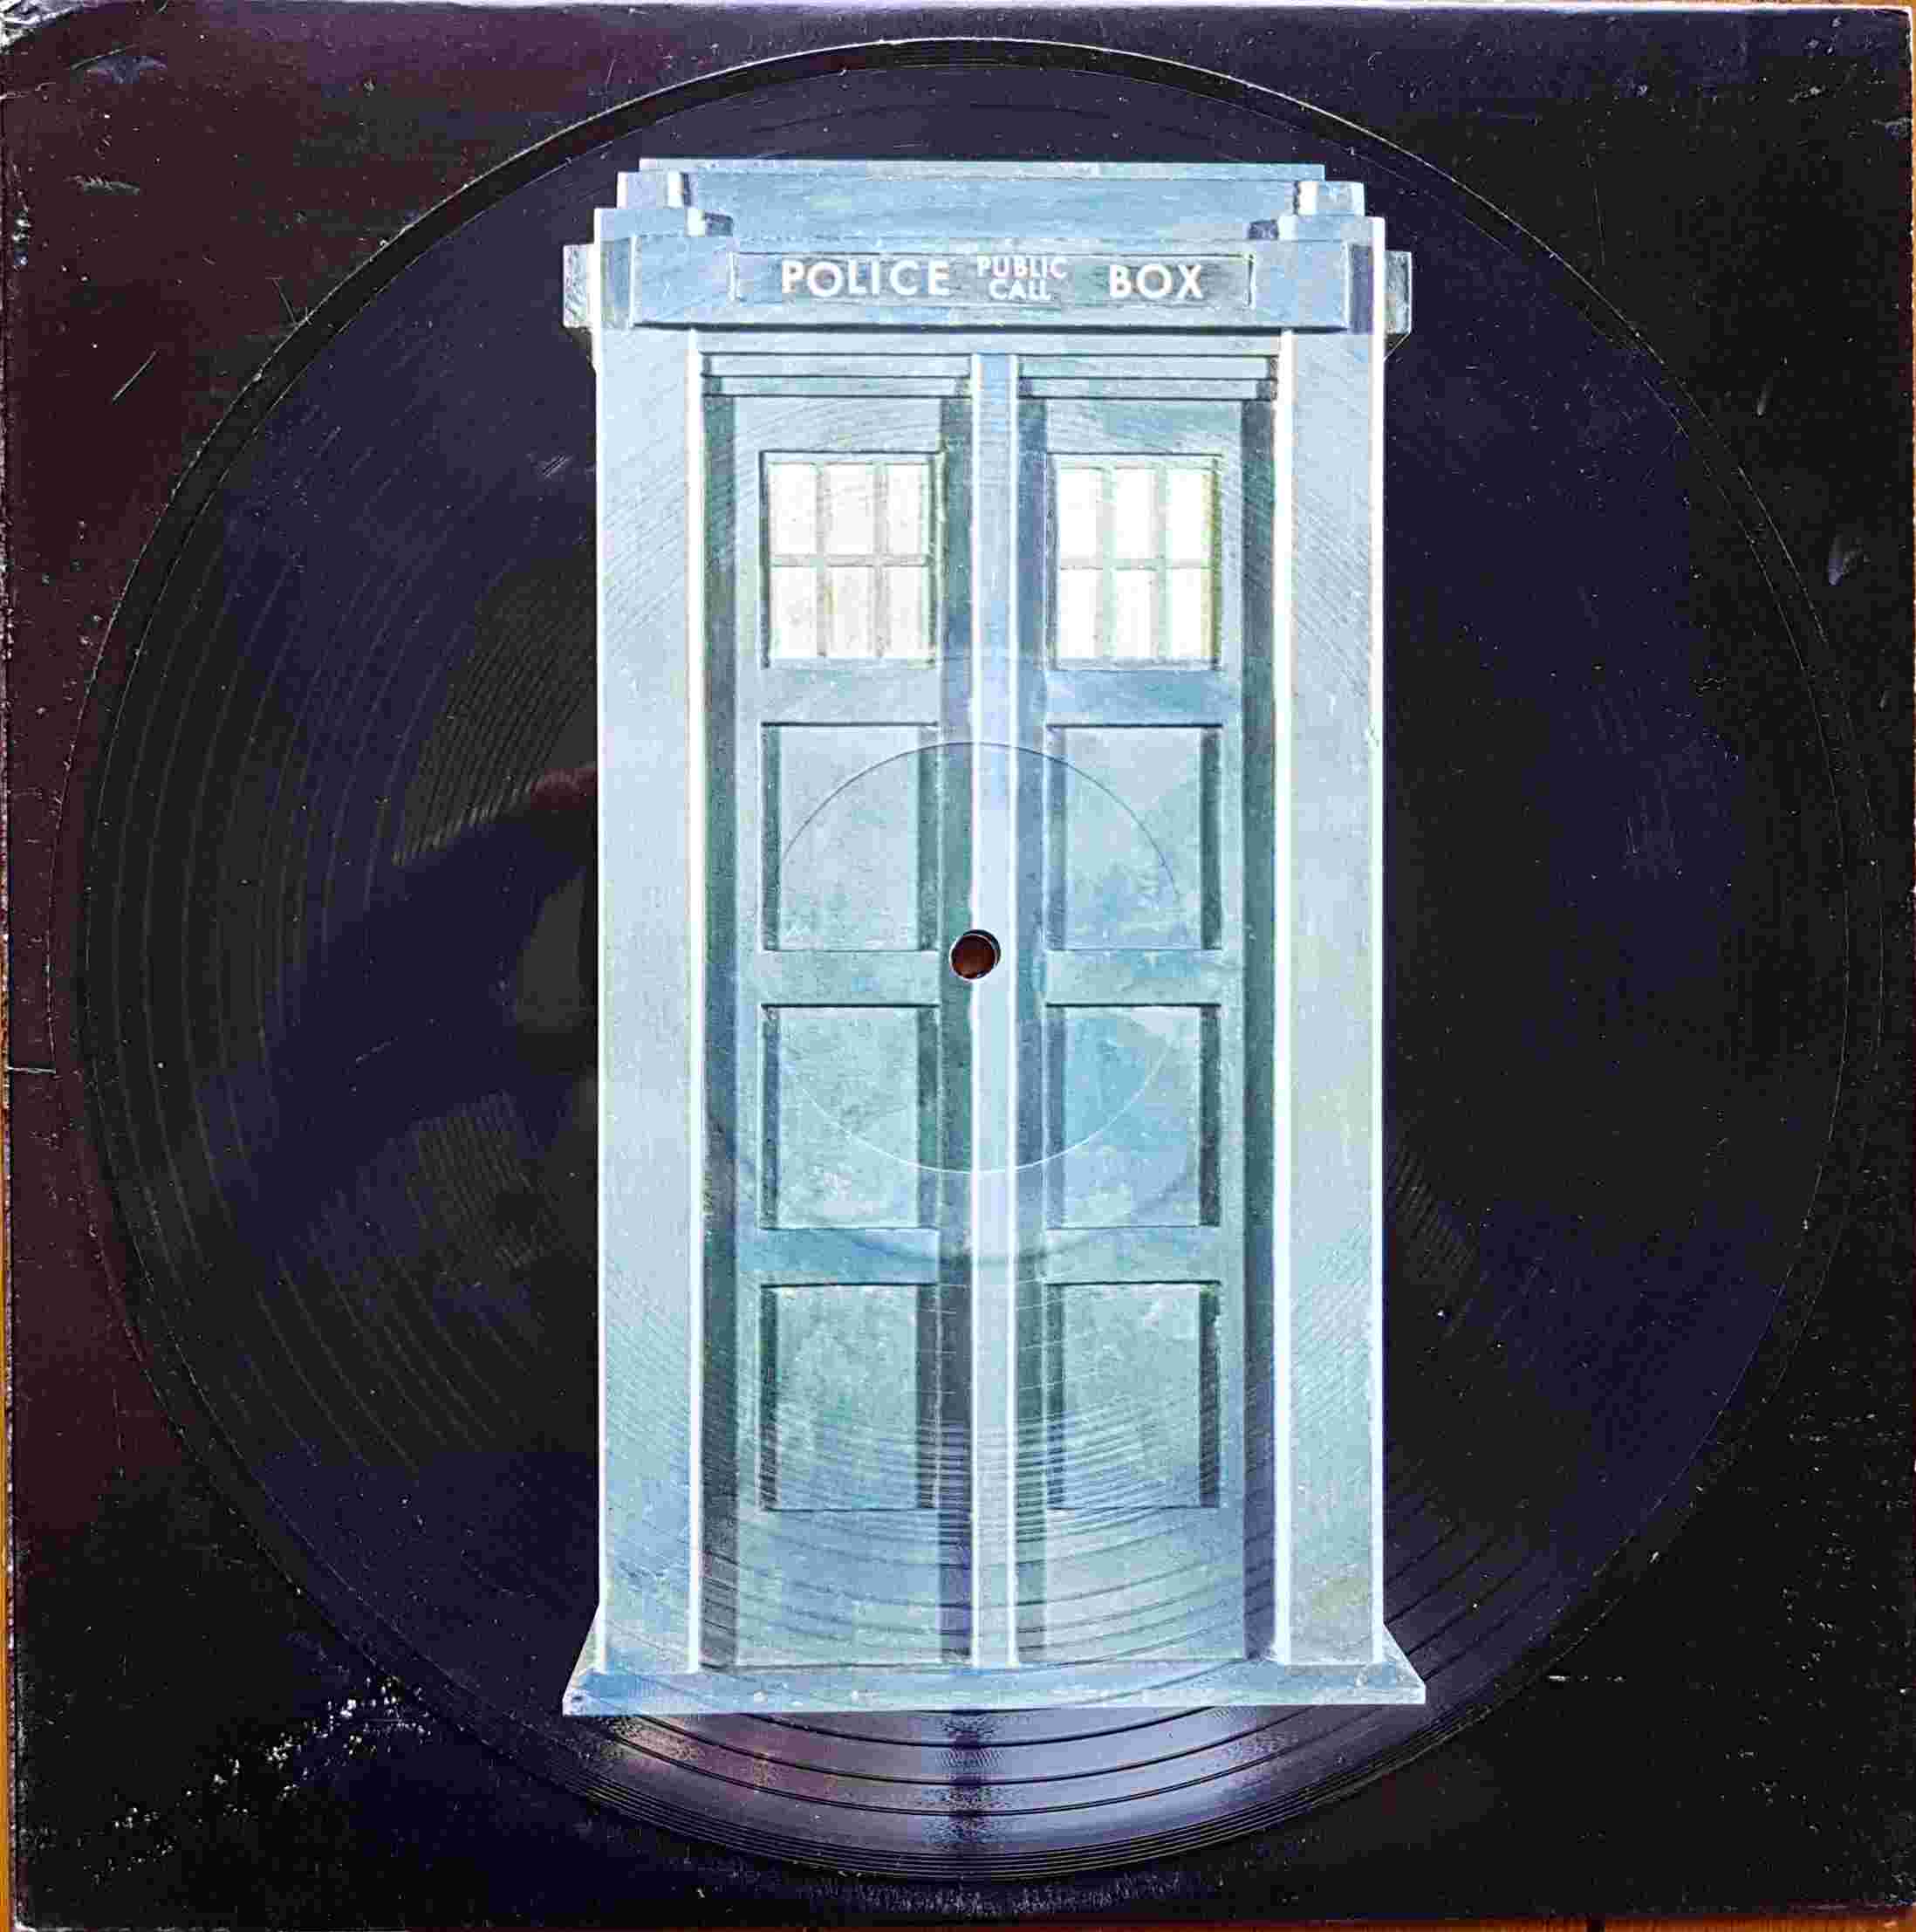 Picture of BBC - 22002 Doctor Who the music by artist Various from the BBC records and Tapes library